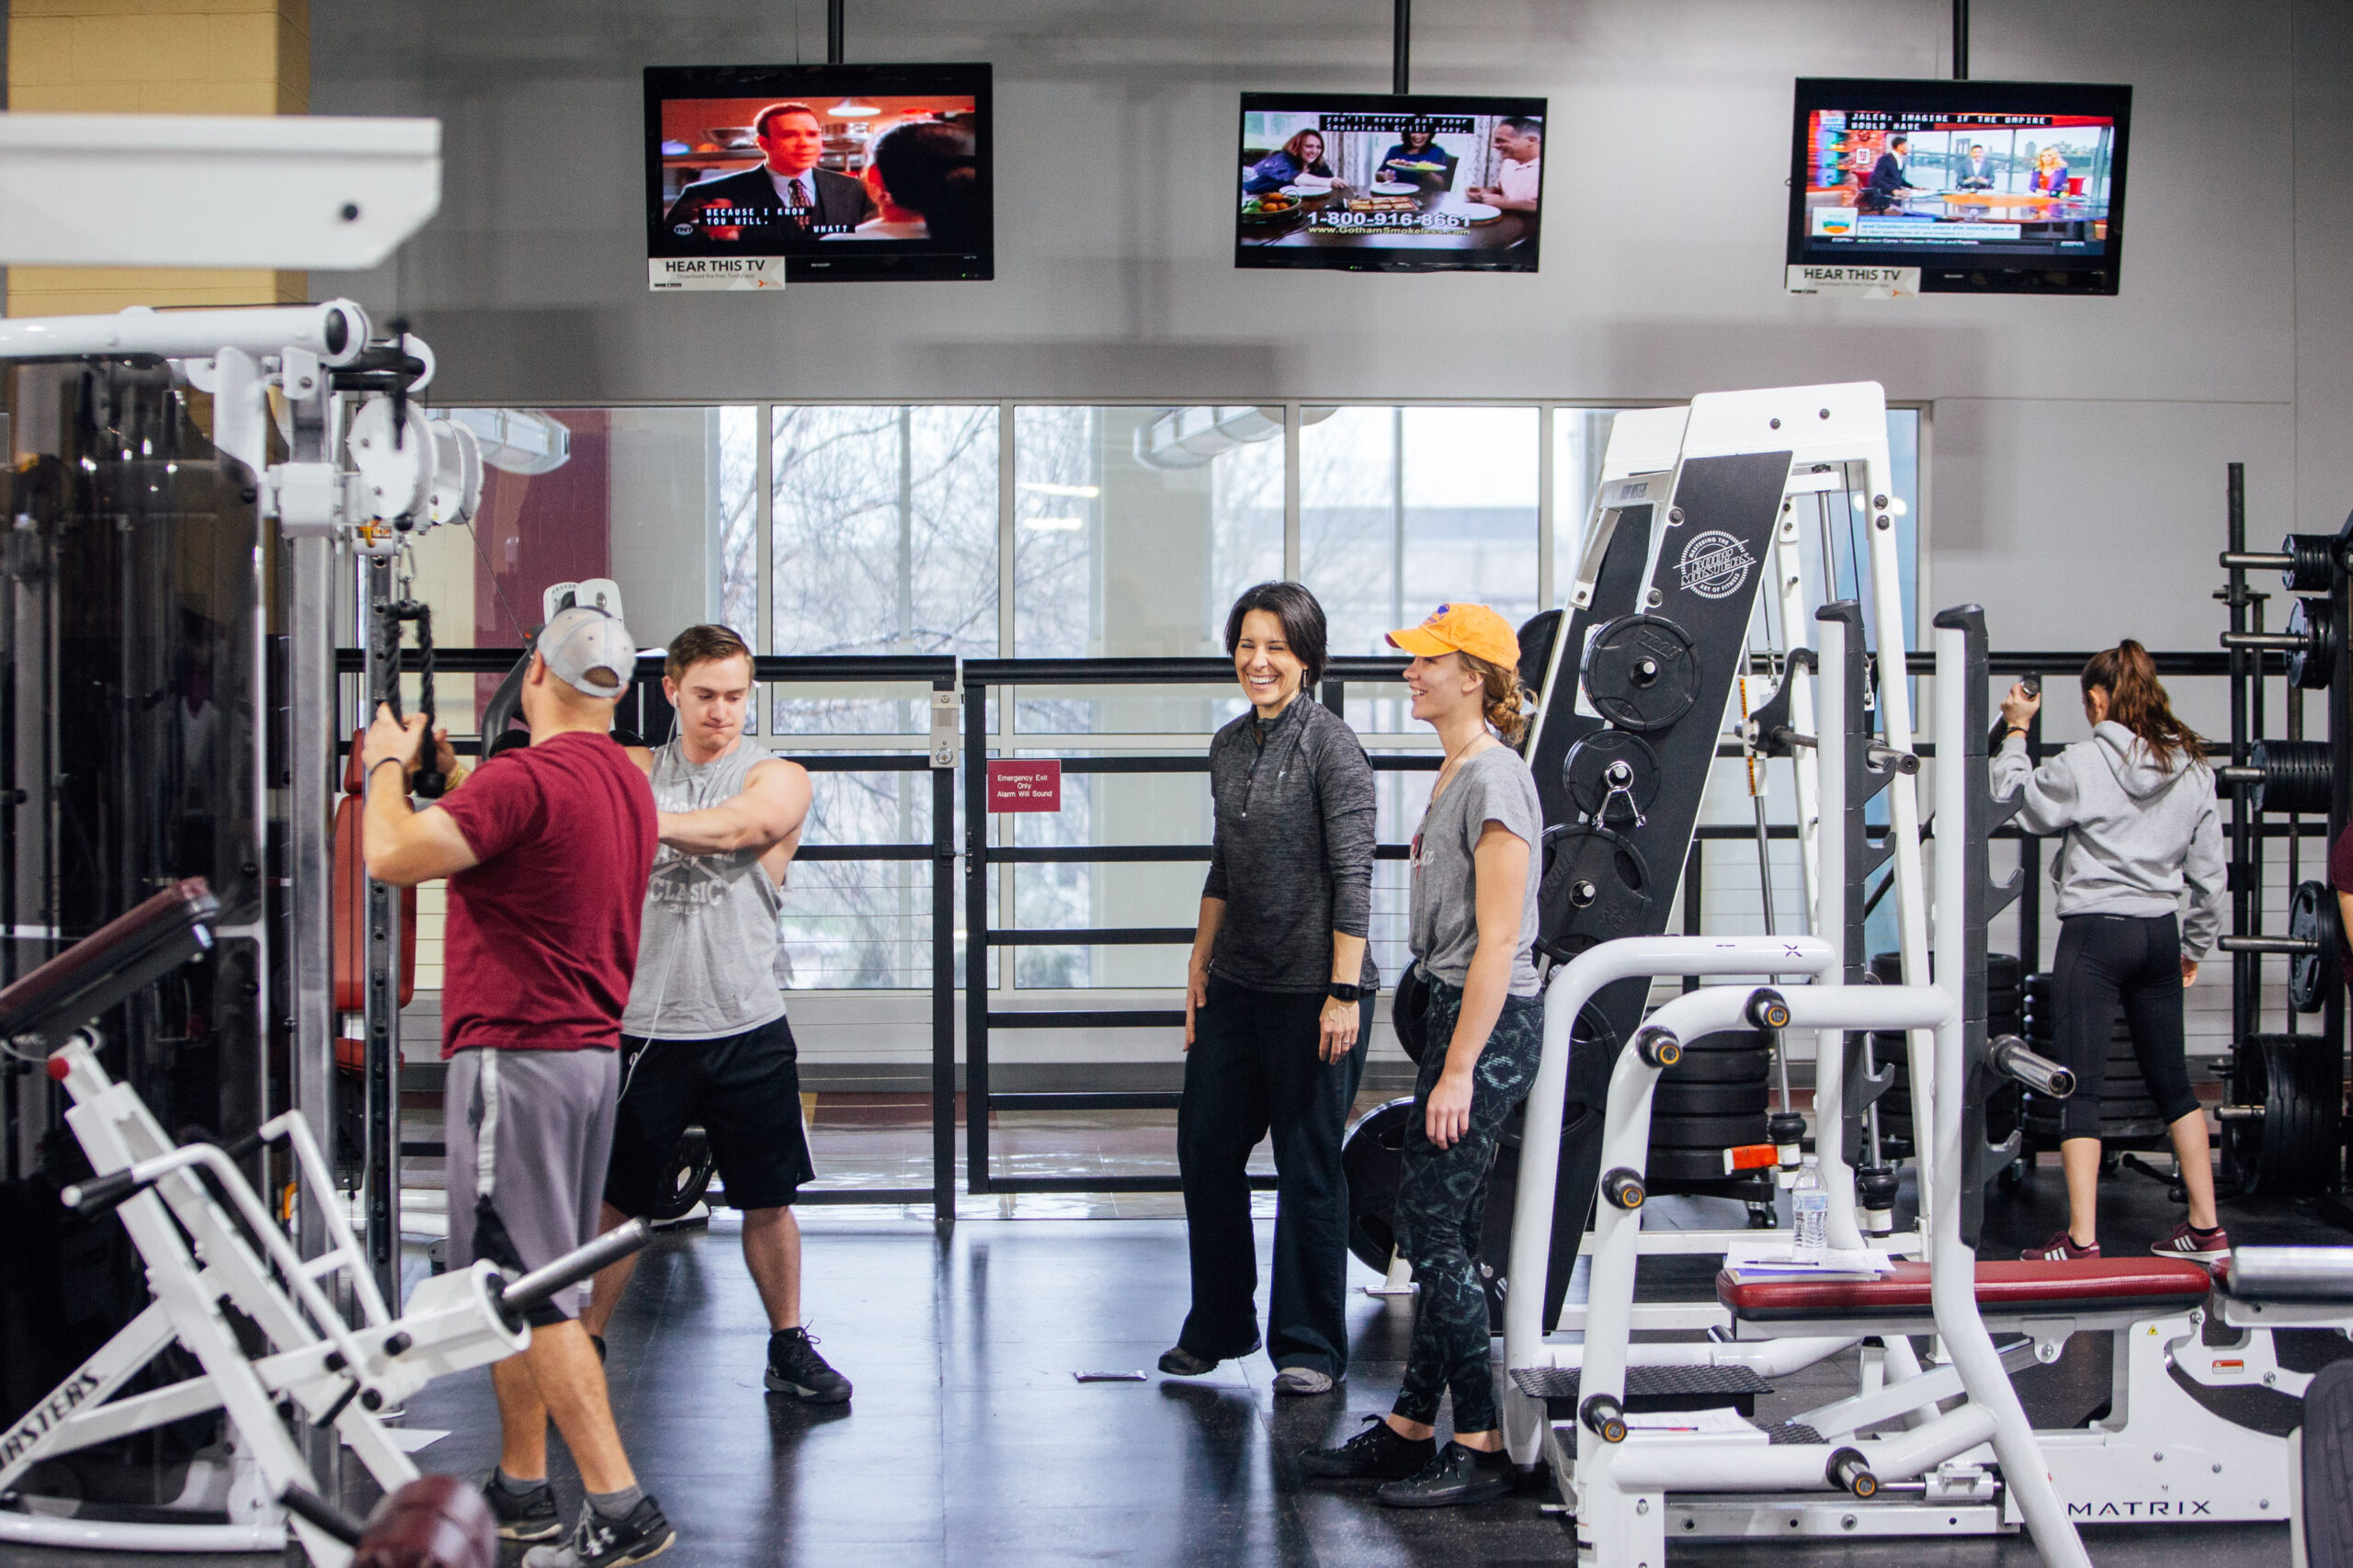 Students use a variety of weight training equipment in a modern-looking indoor gym.